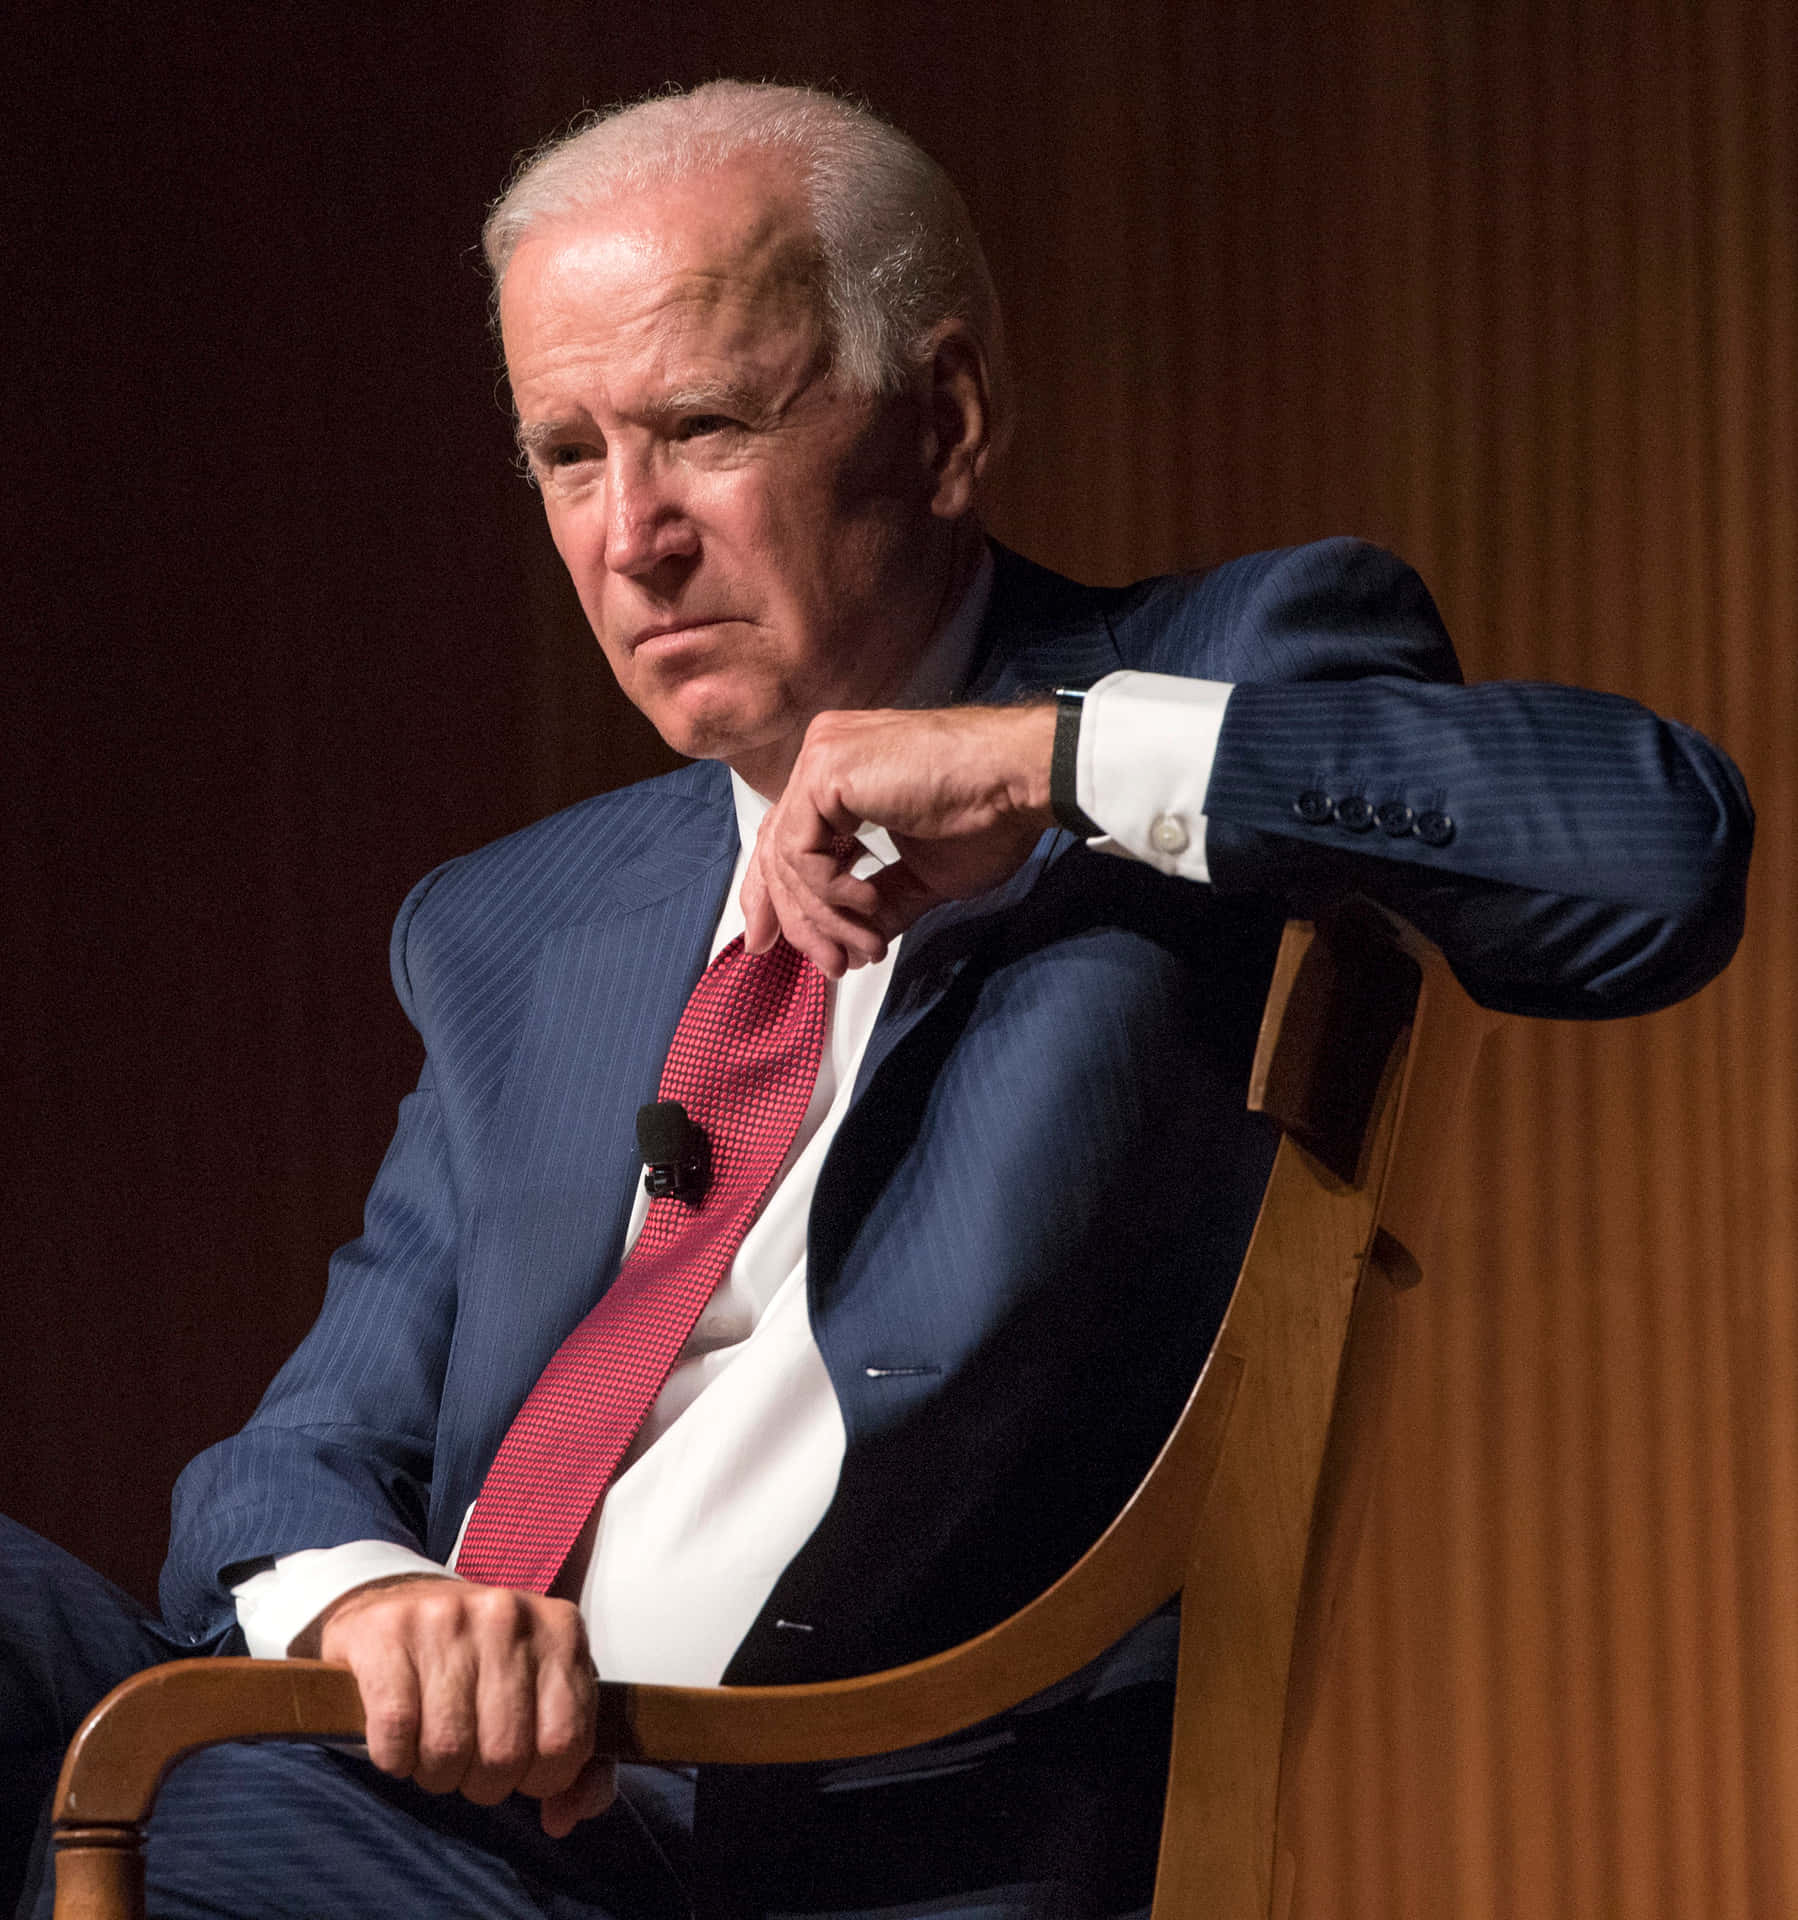 Joe Biden: Paving the way for the United States of Equality